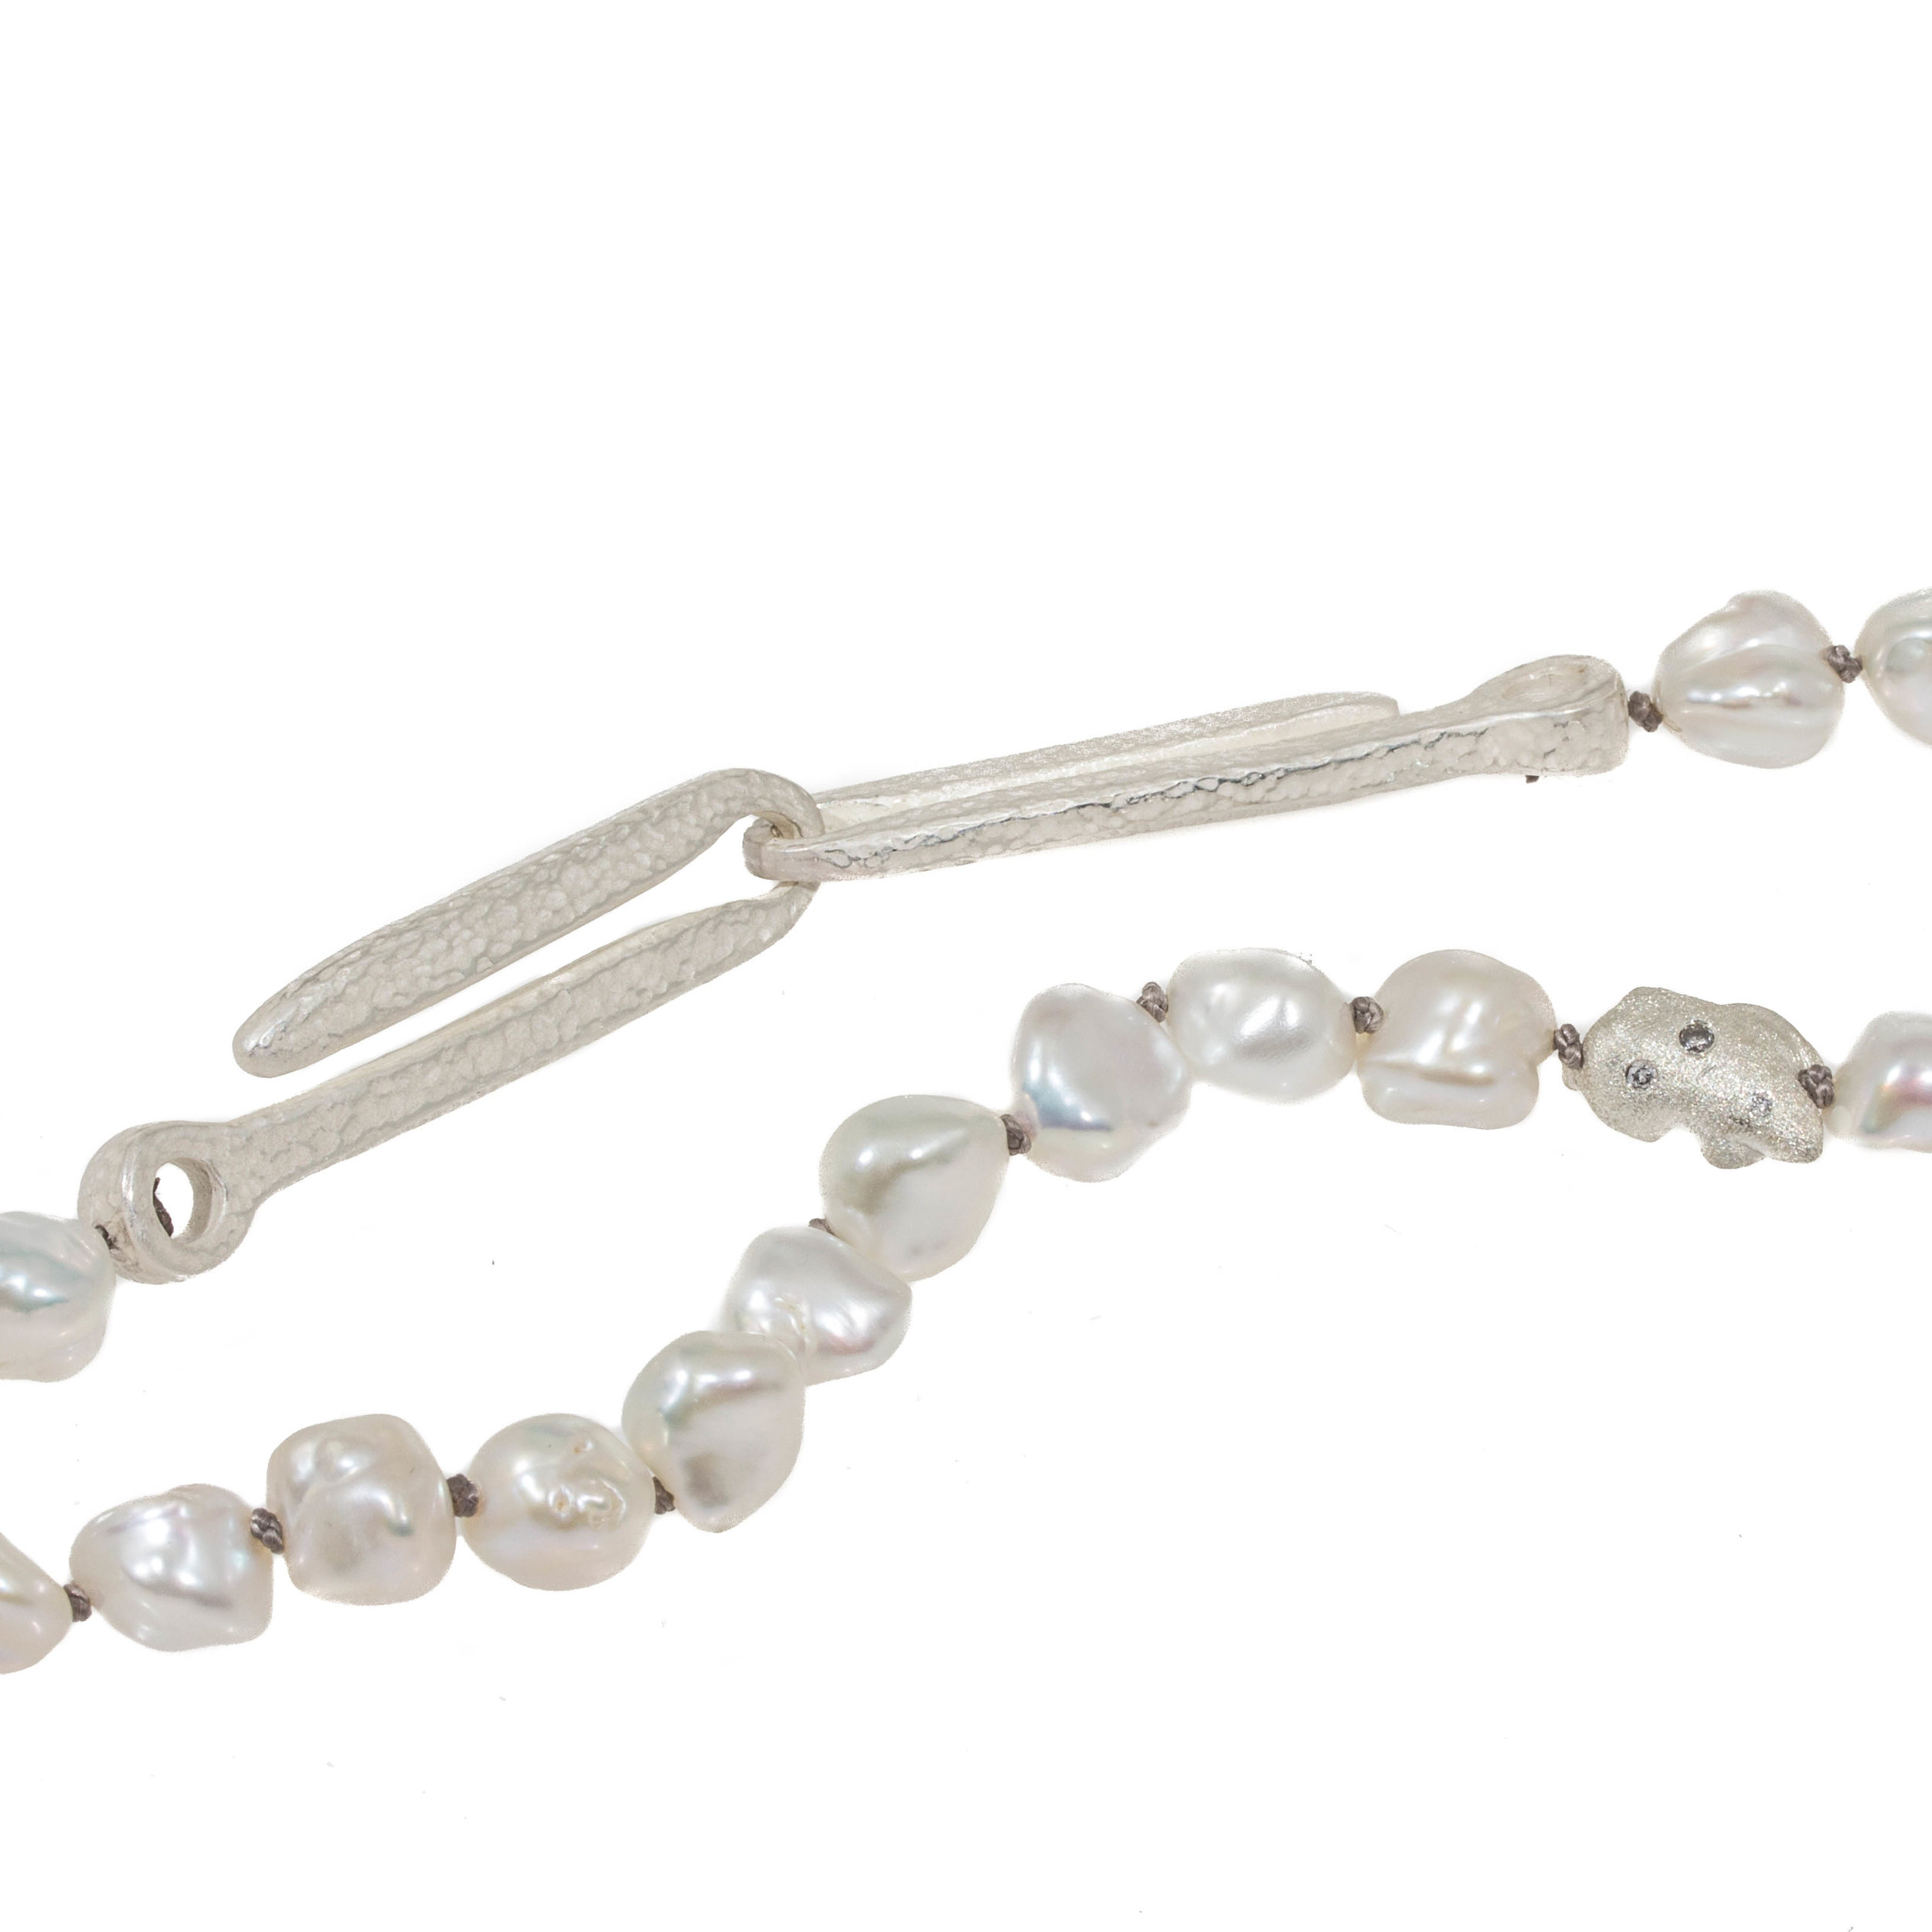 Keshi Pearl Necklace with Gray Diamonds set in Organic Silver Beads